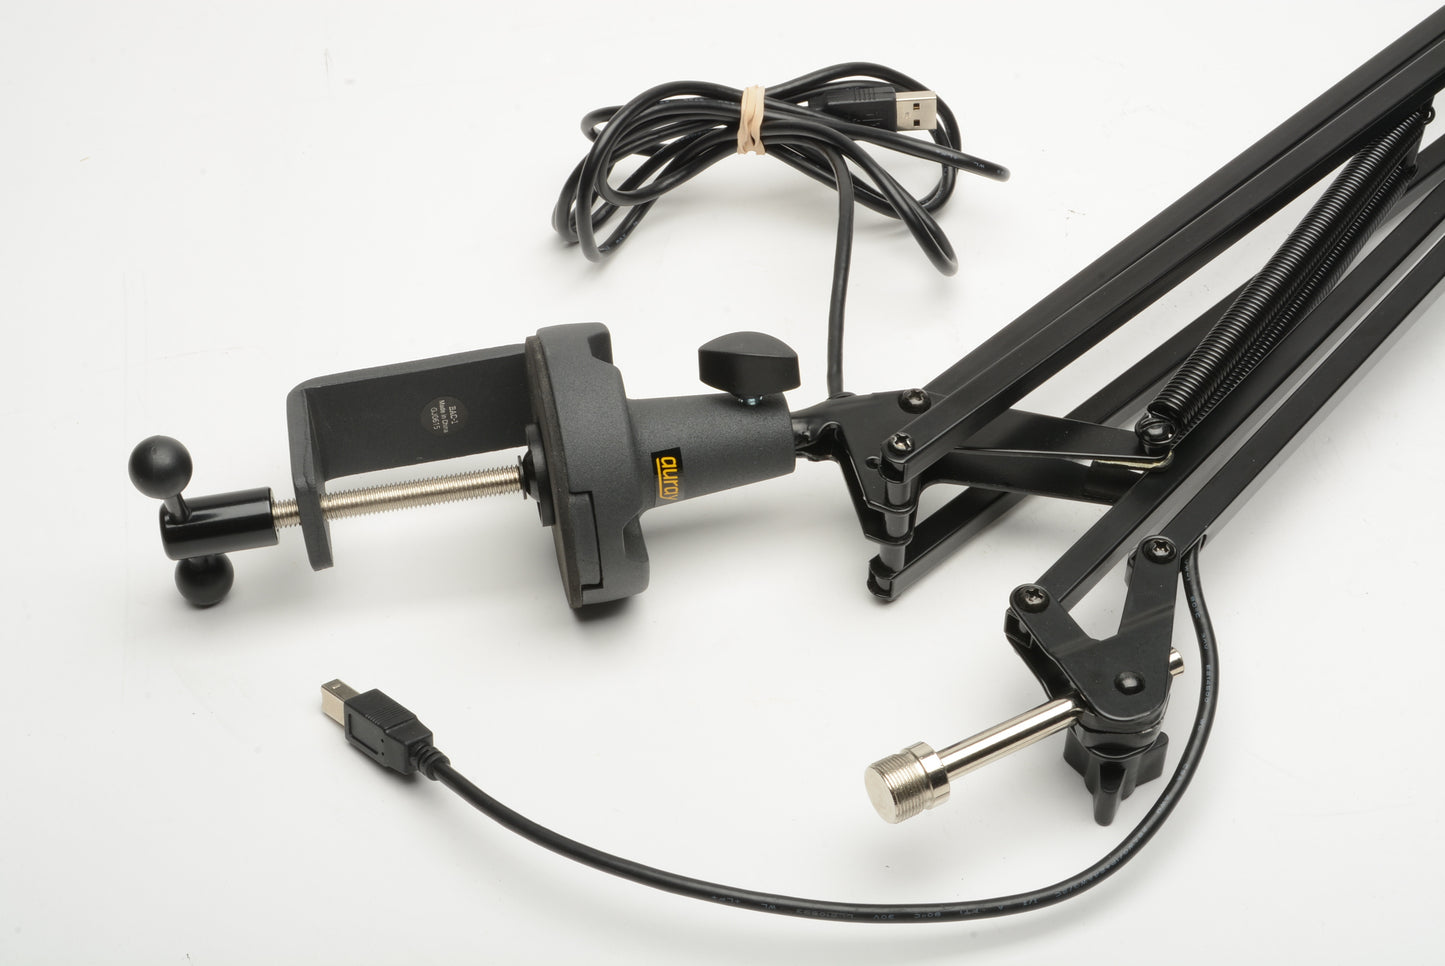 Auray BAI-2U 2-Section Broadcast Arm w/Internal Springs & Integrated USB Cable + Clamp